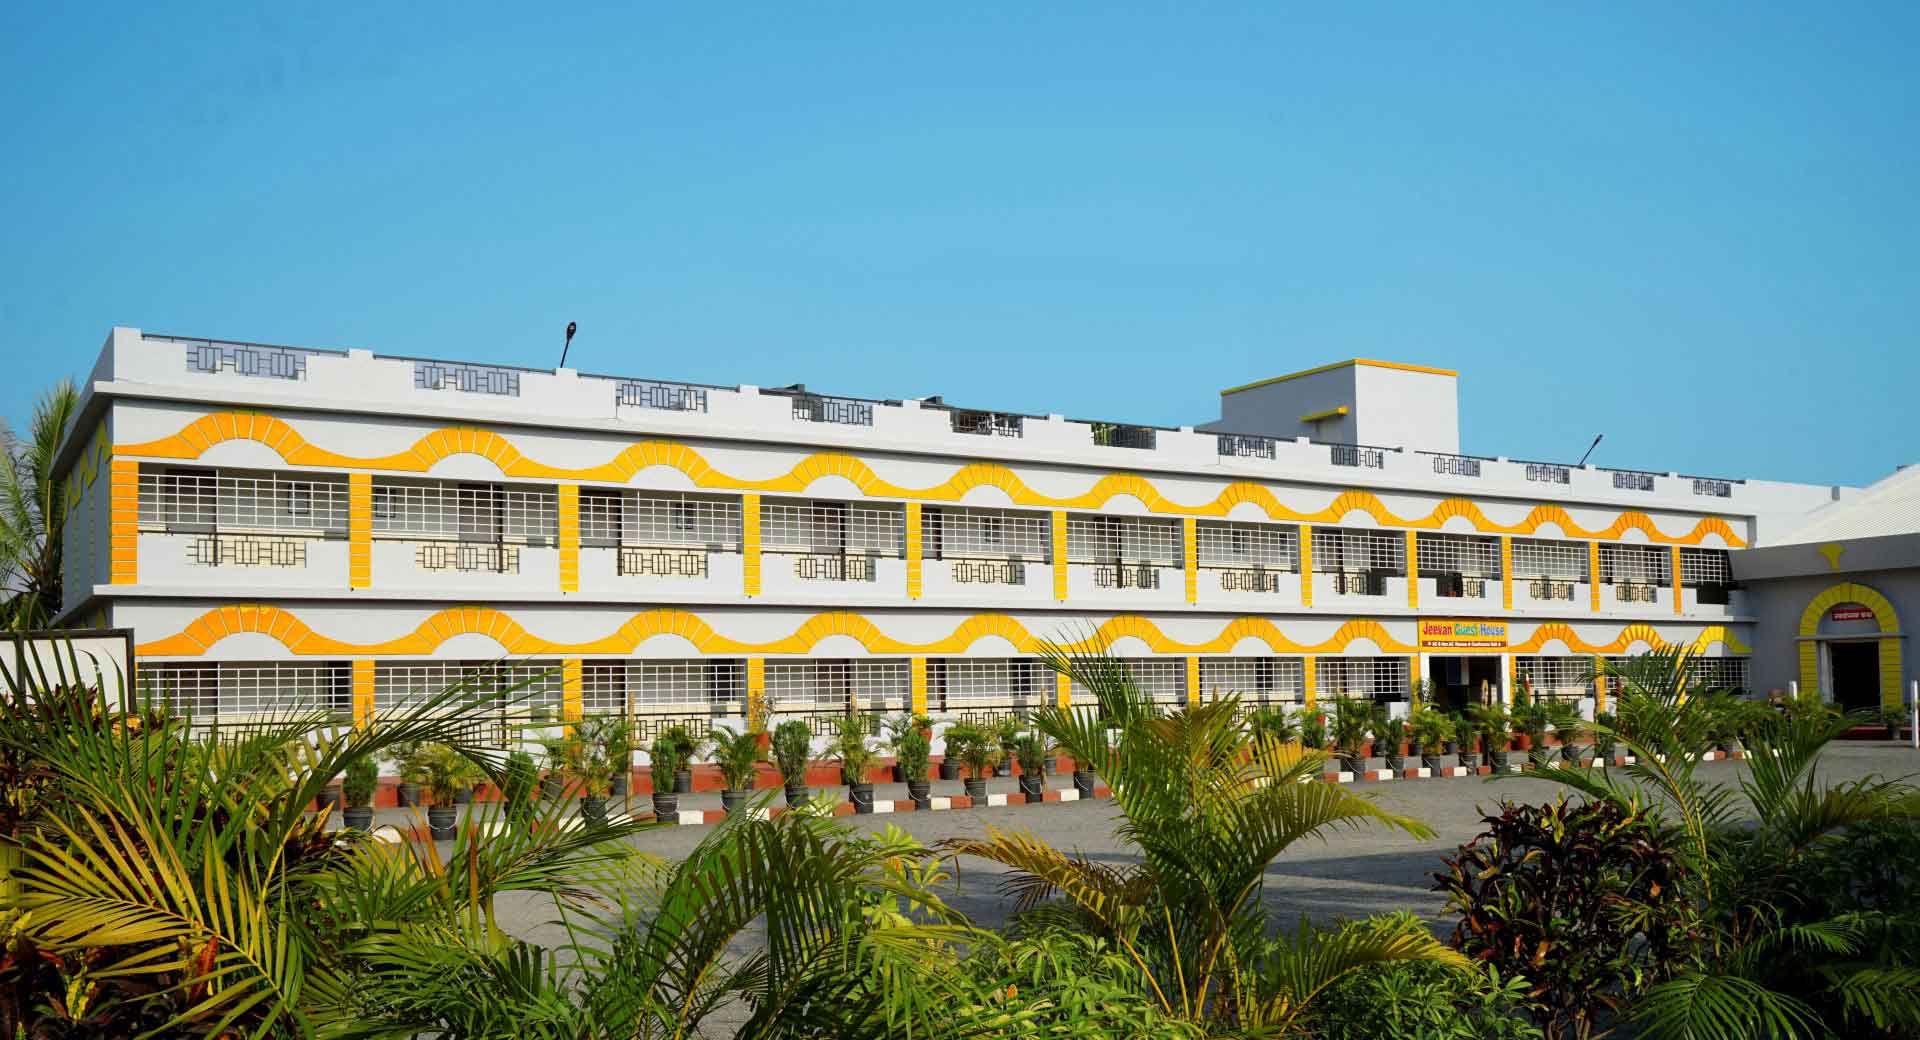 Hotel Jeevan - Best place for lodging